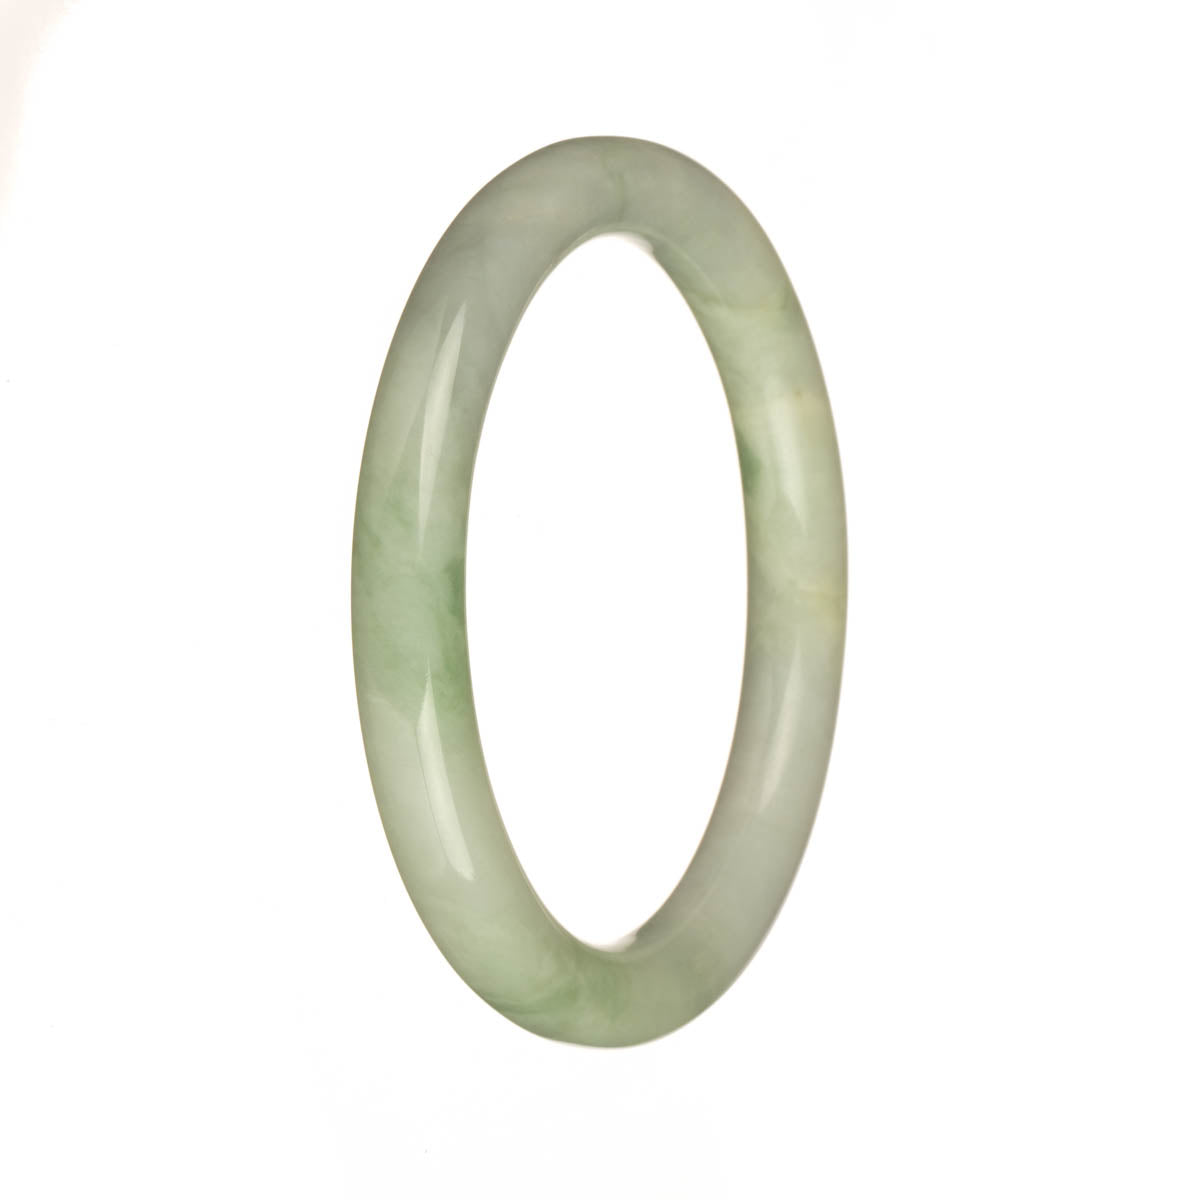 A dainty round jade bracelet in light green and pale green shades.